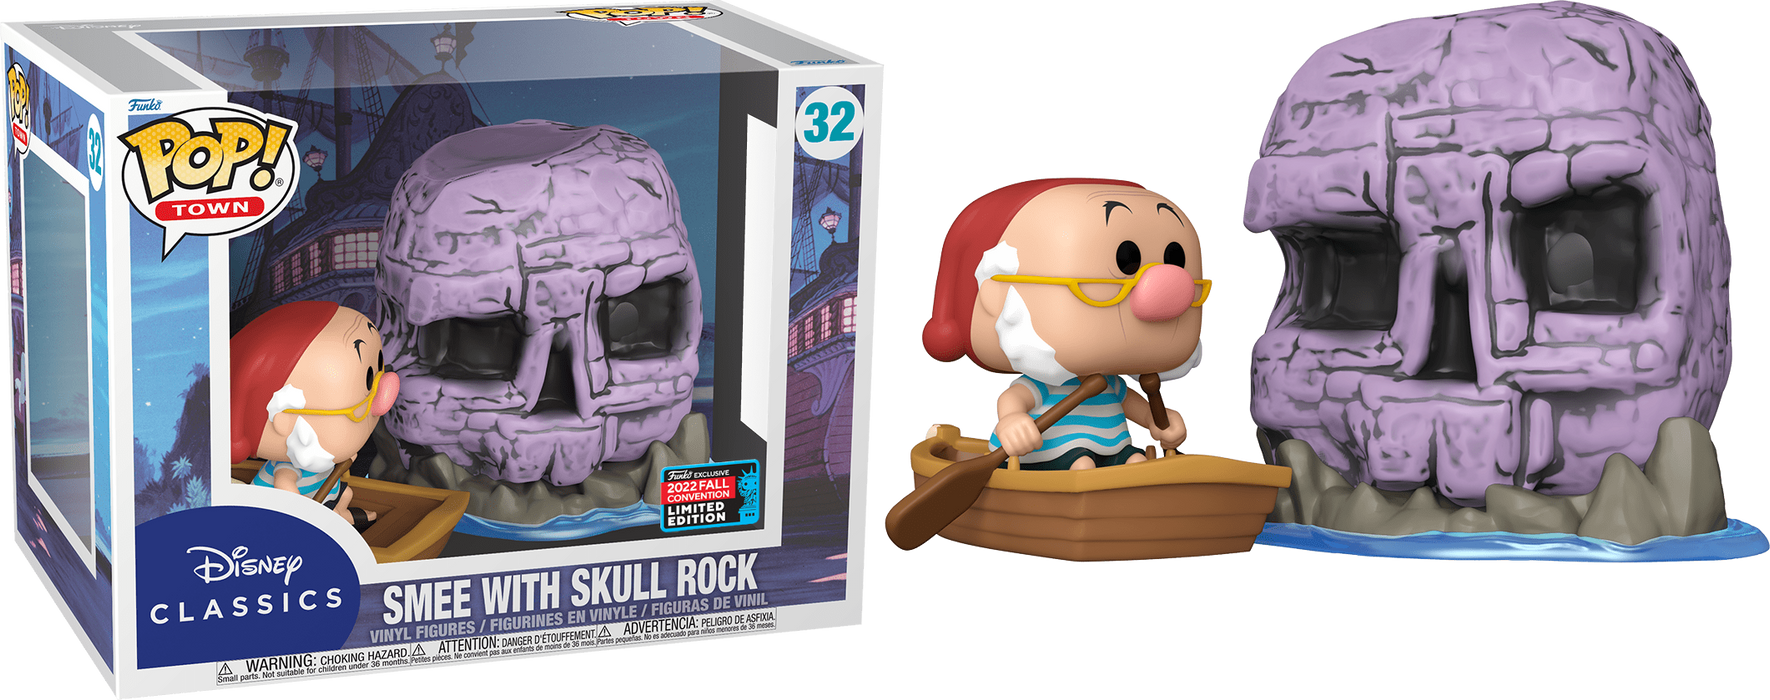 Smee With Skull Rock #32 2022 Fall Convention Limited Edition Funko Pop! Town Disney Classics